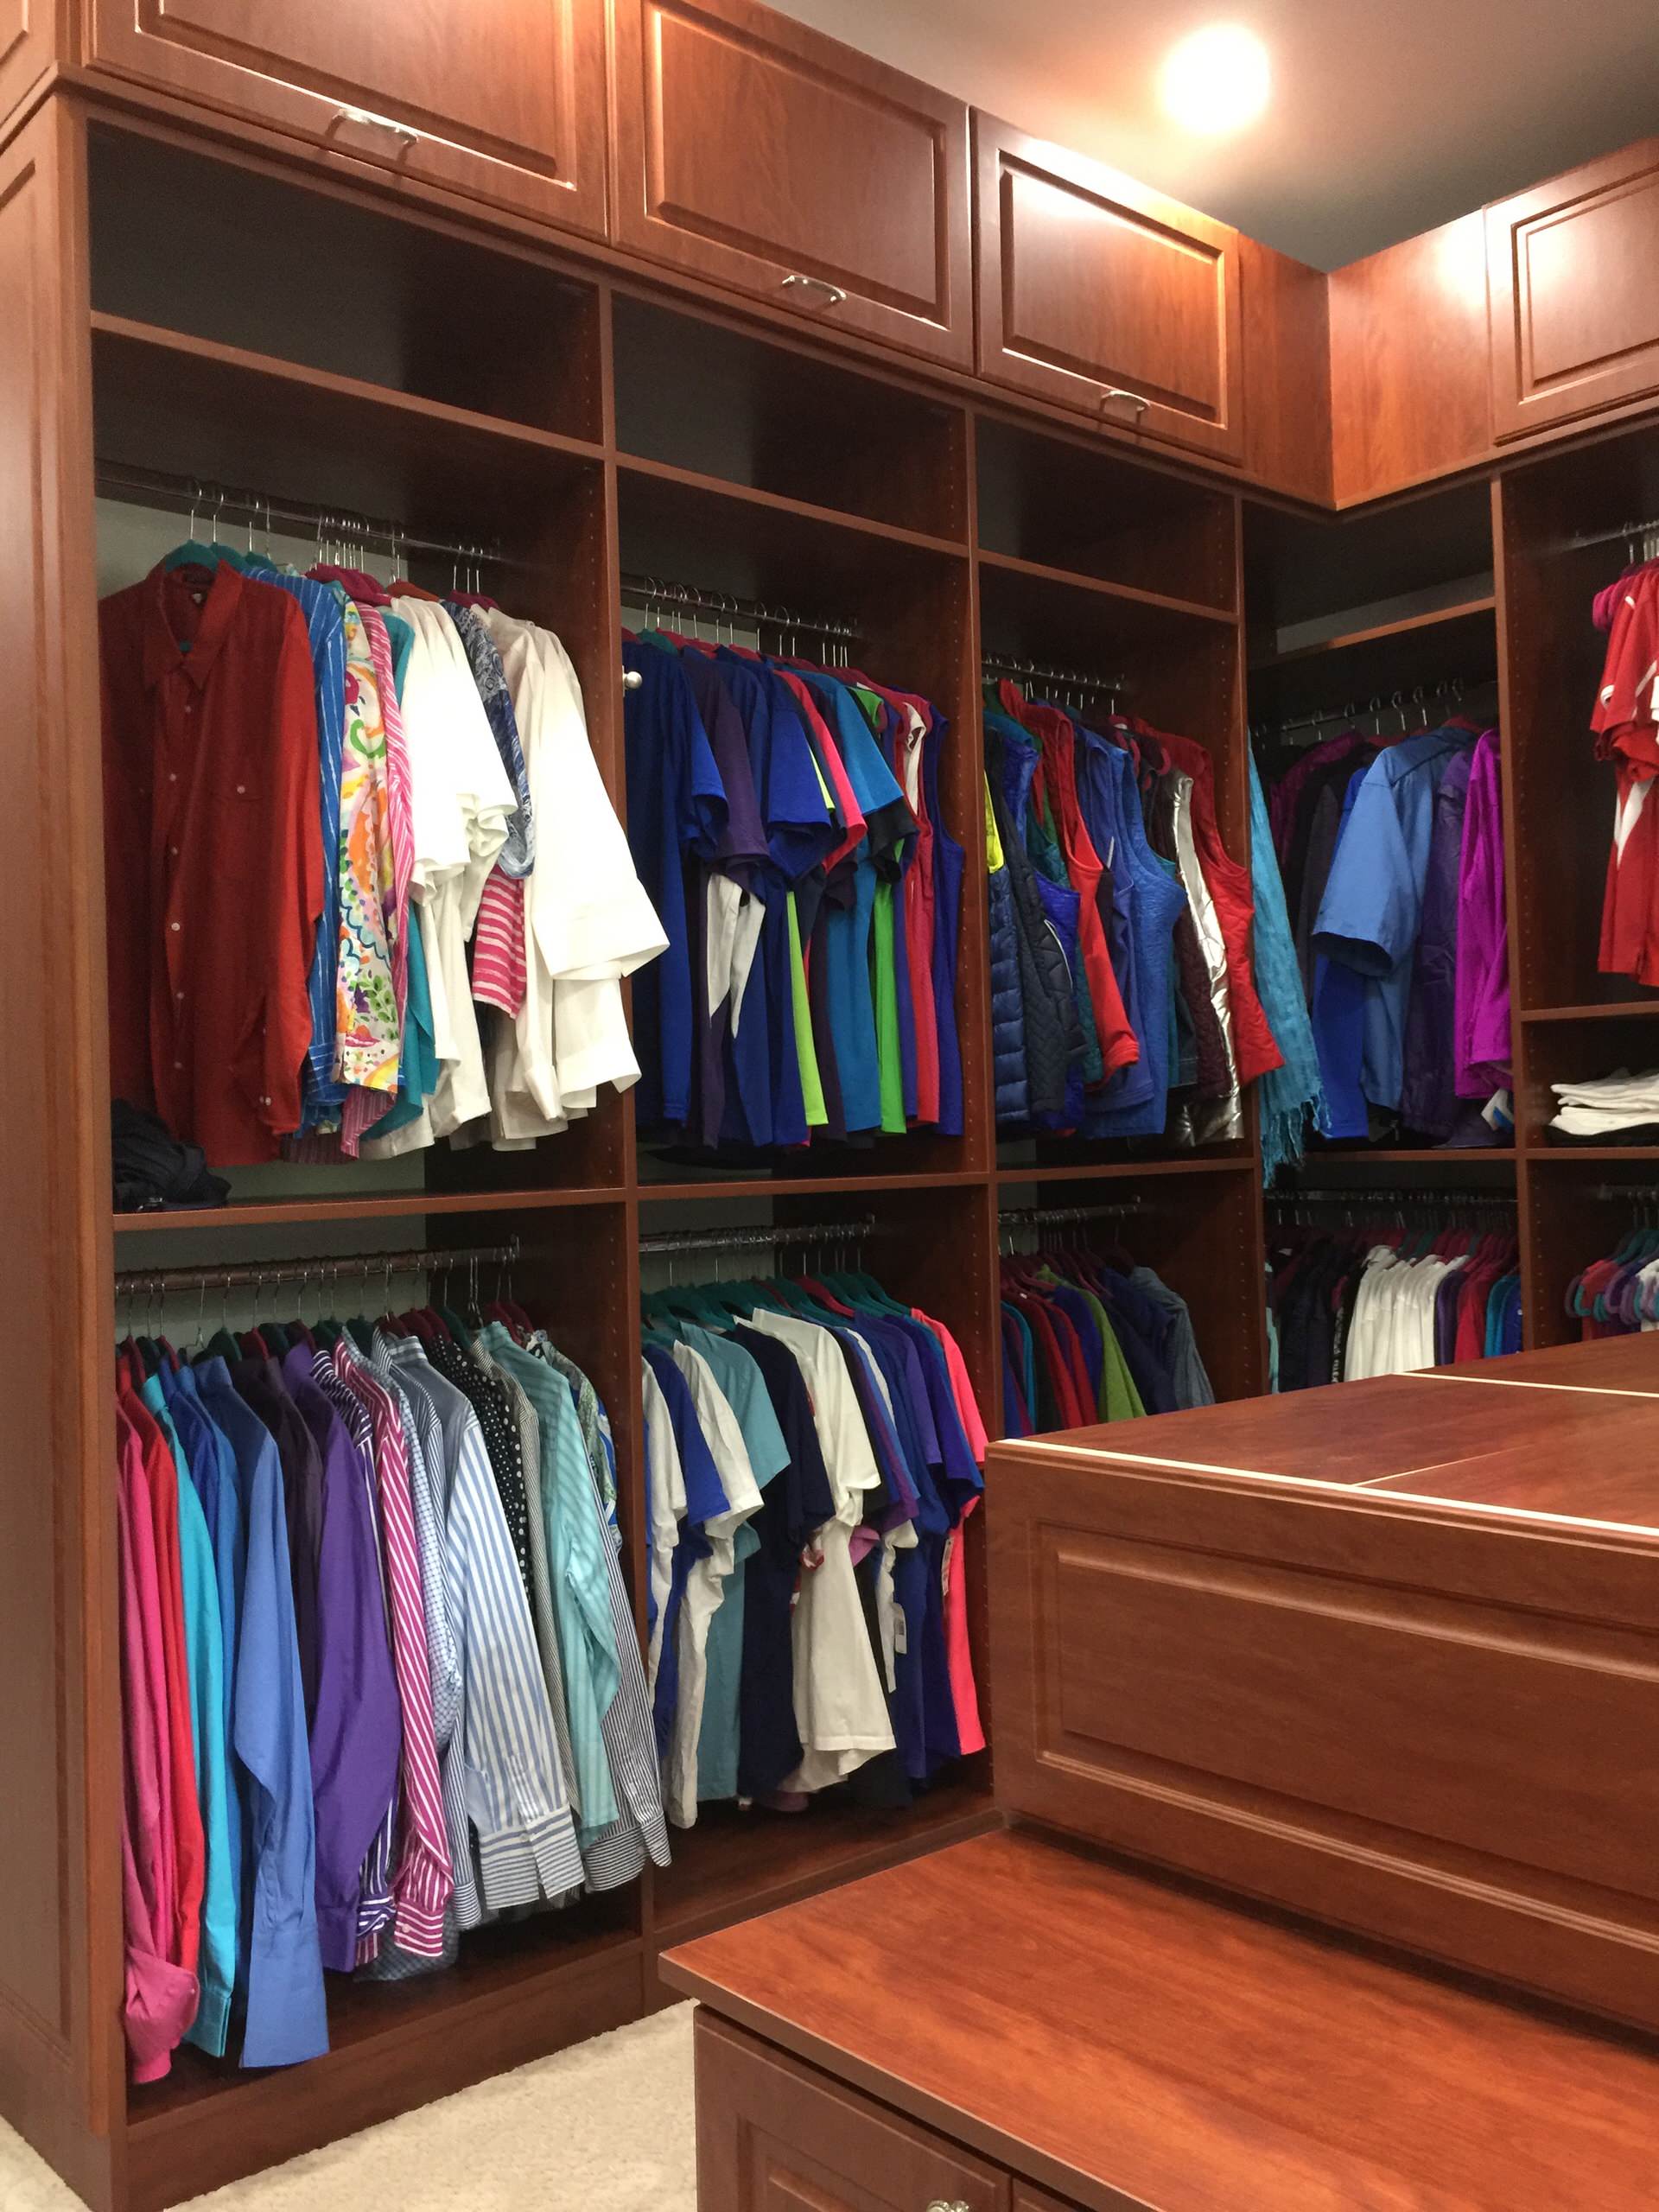 Large Walk-in Closet and Laundry Room in Balsam, NC